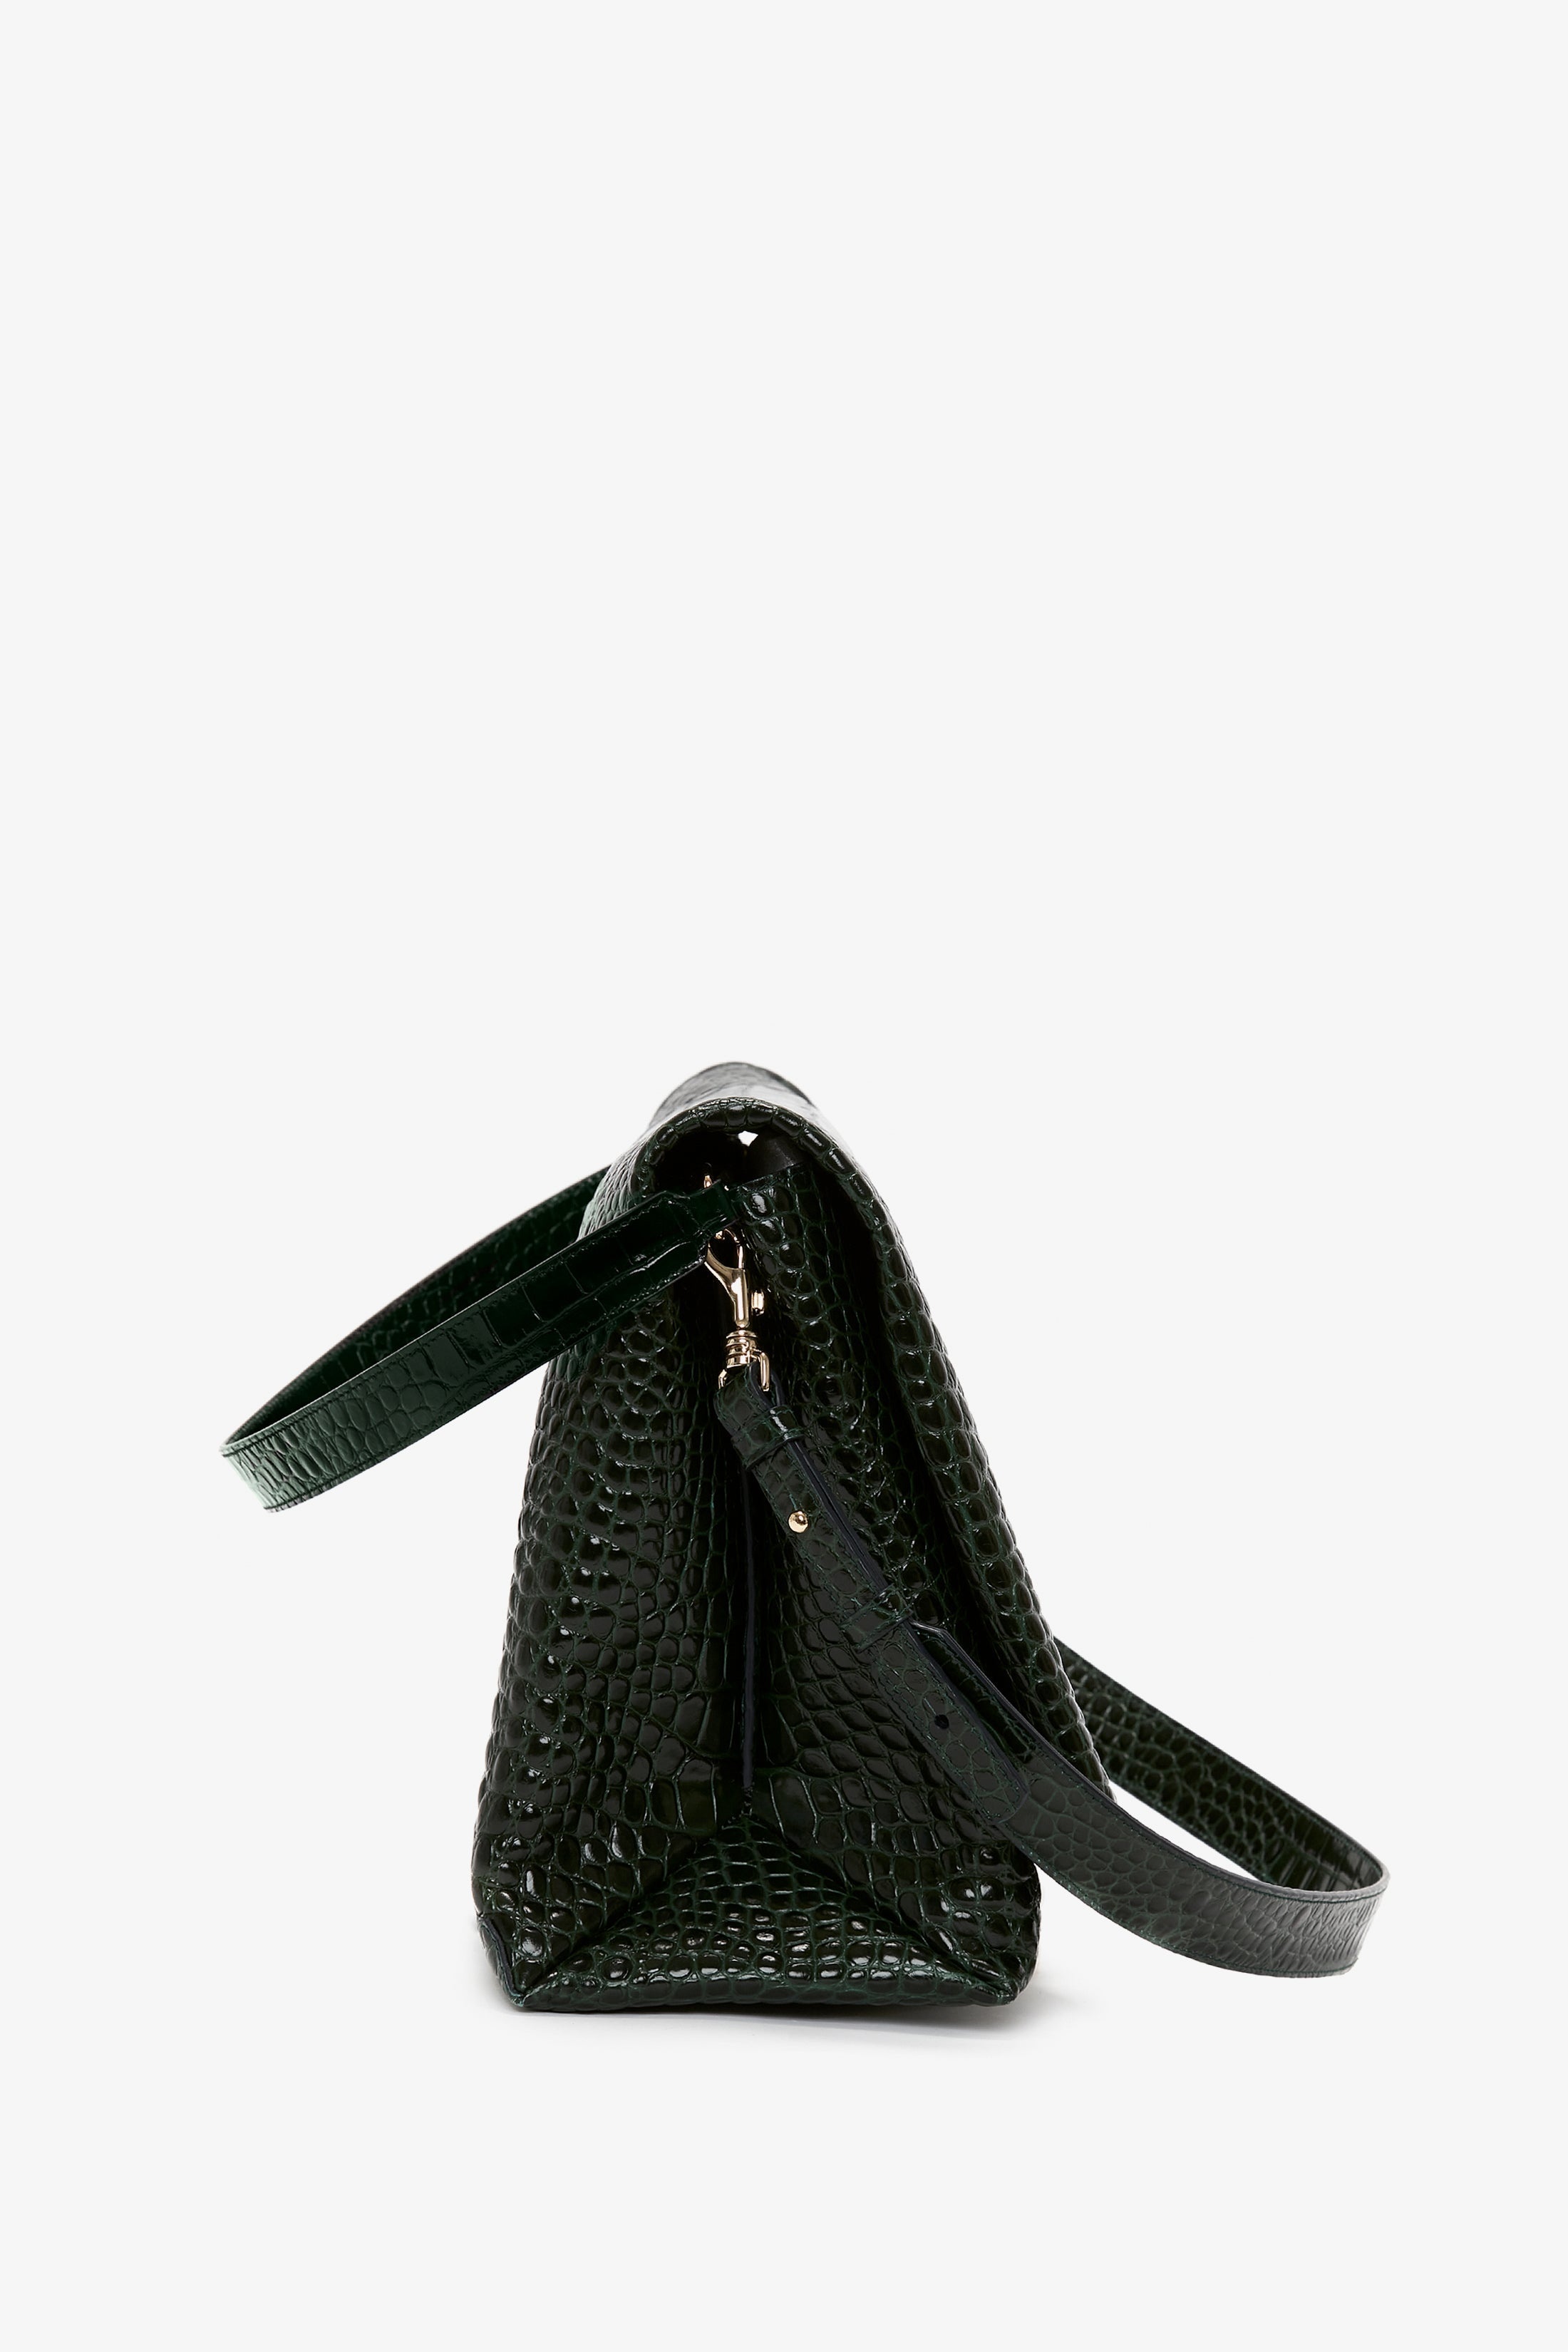 Jumbo Chain Pouch in Dark Forest Croc Leather - 4